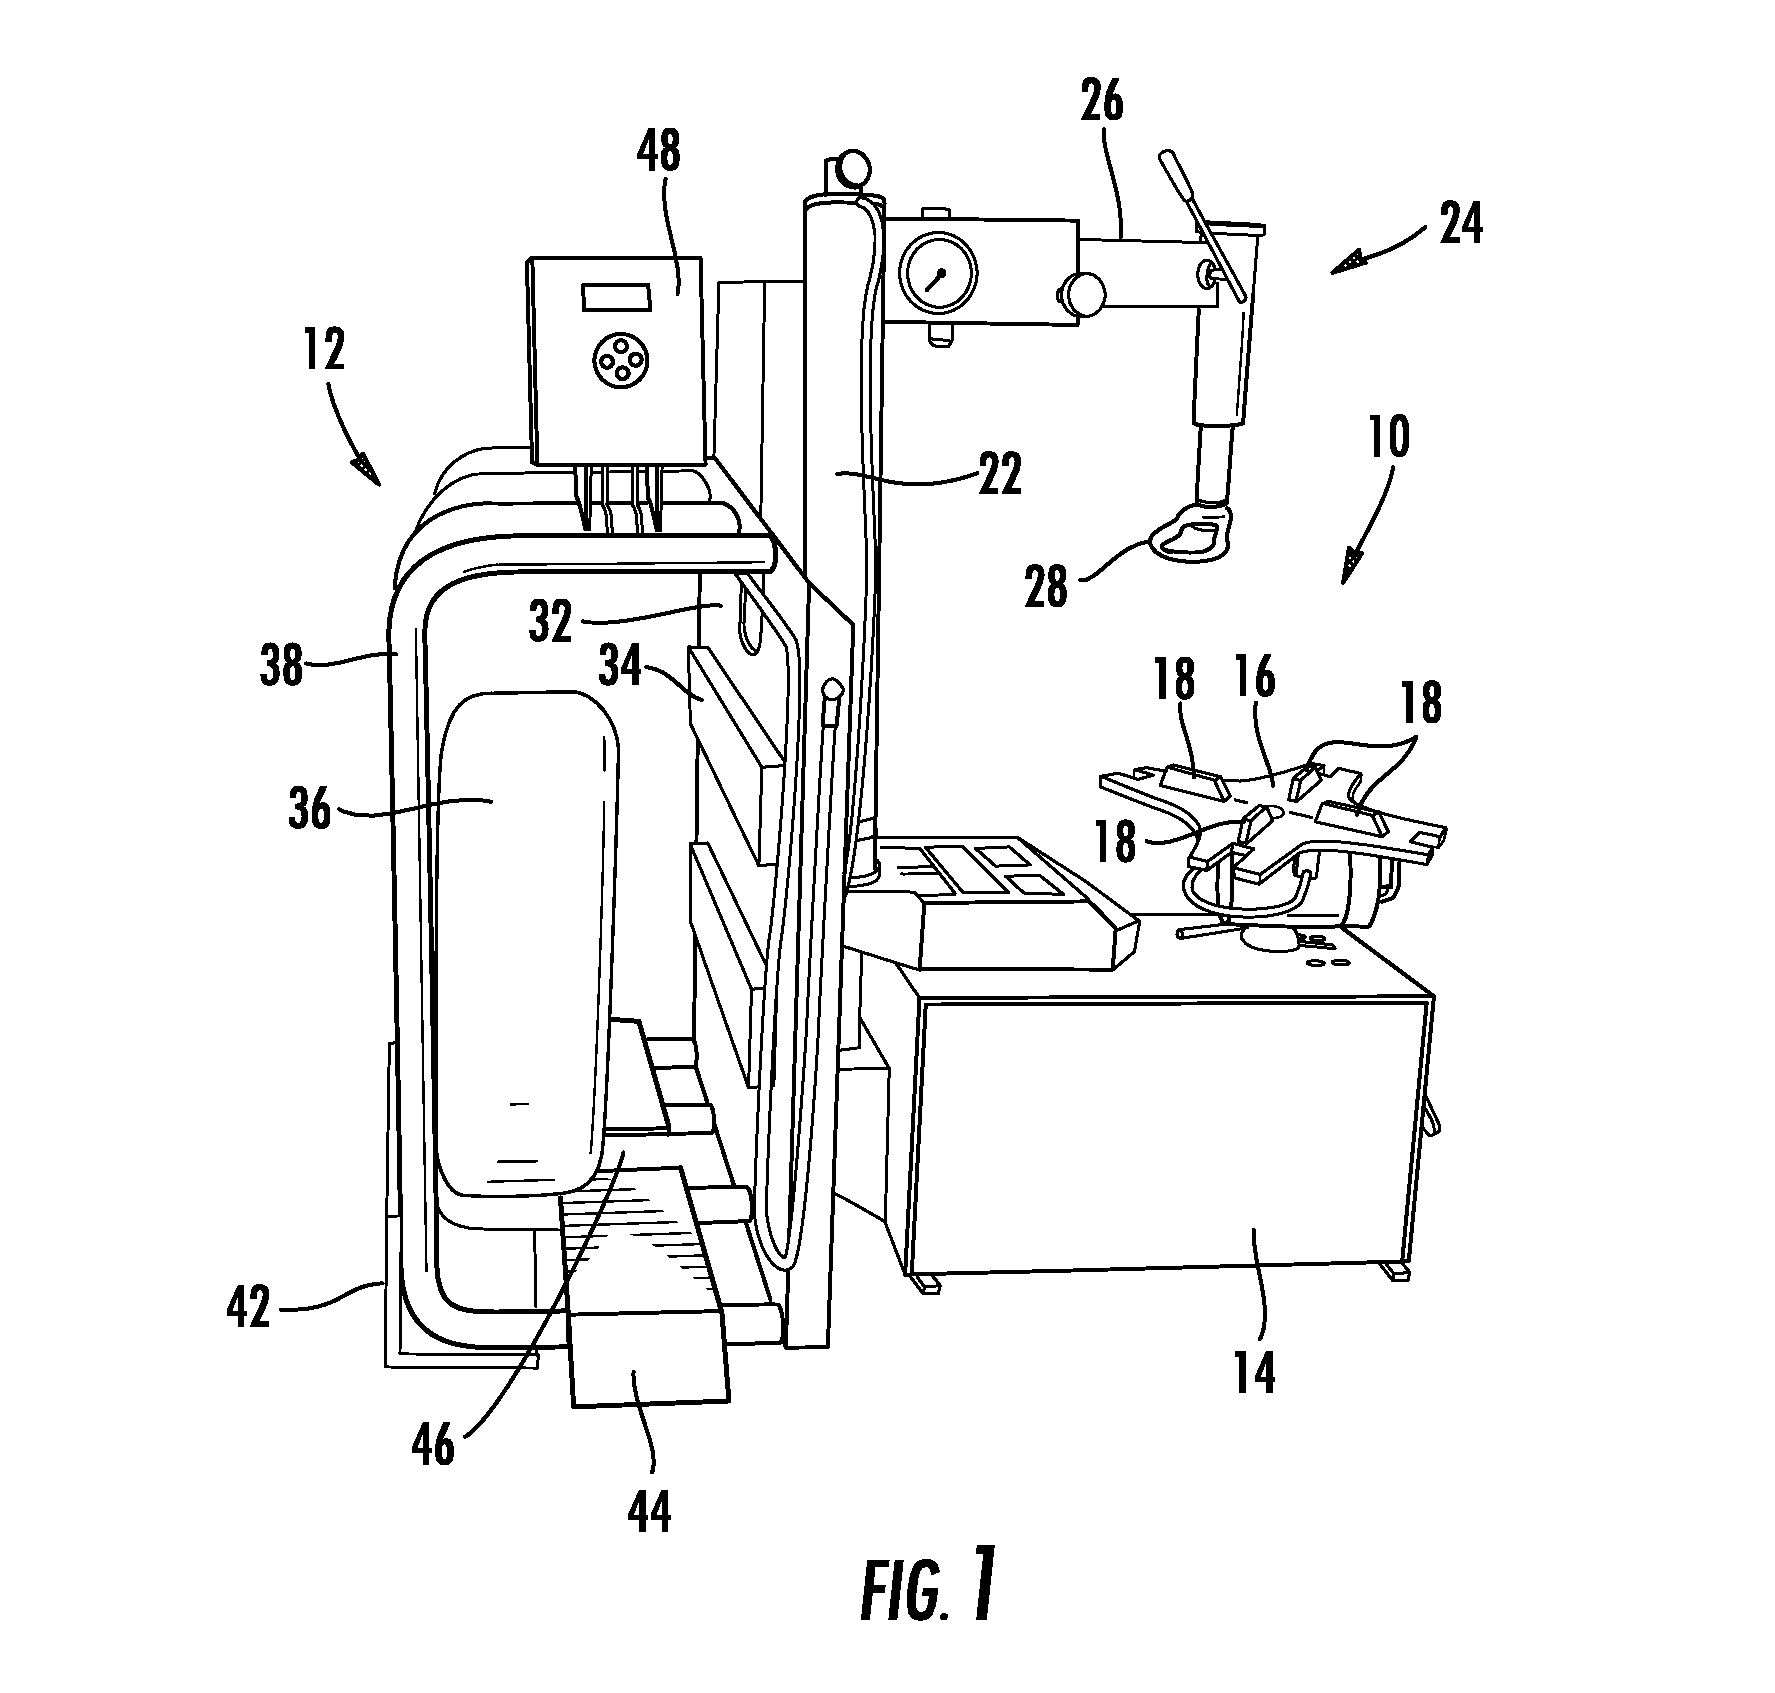 Tire changer with attached inflation cage